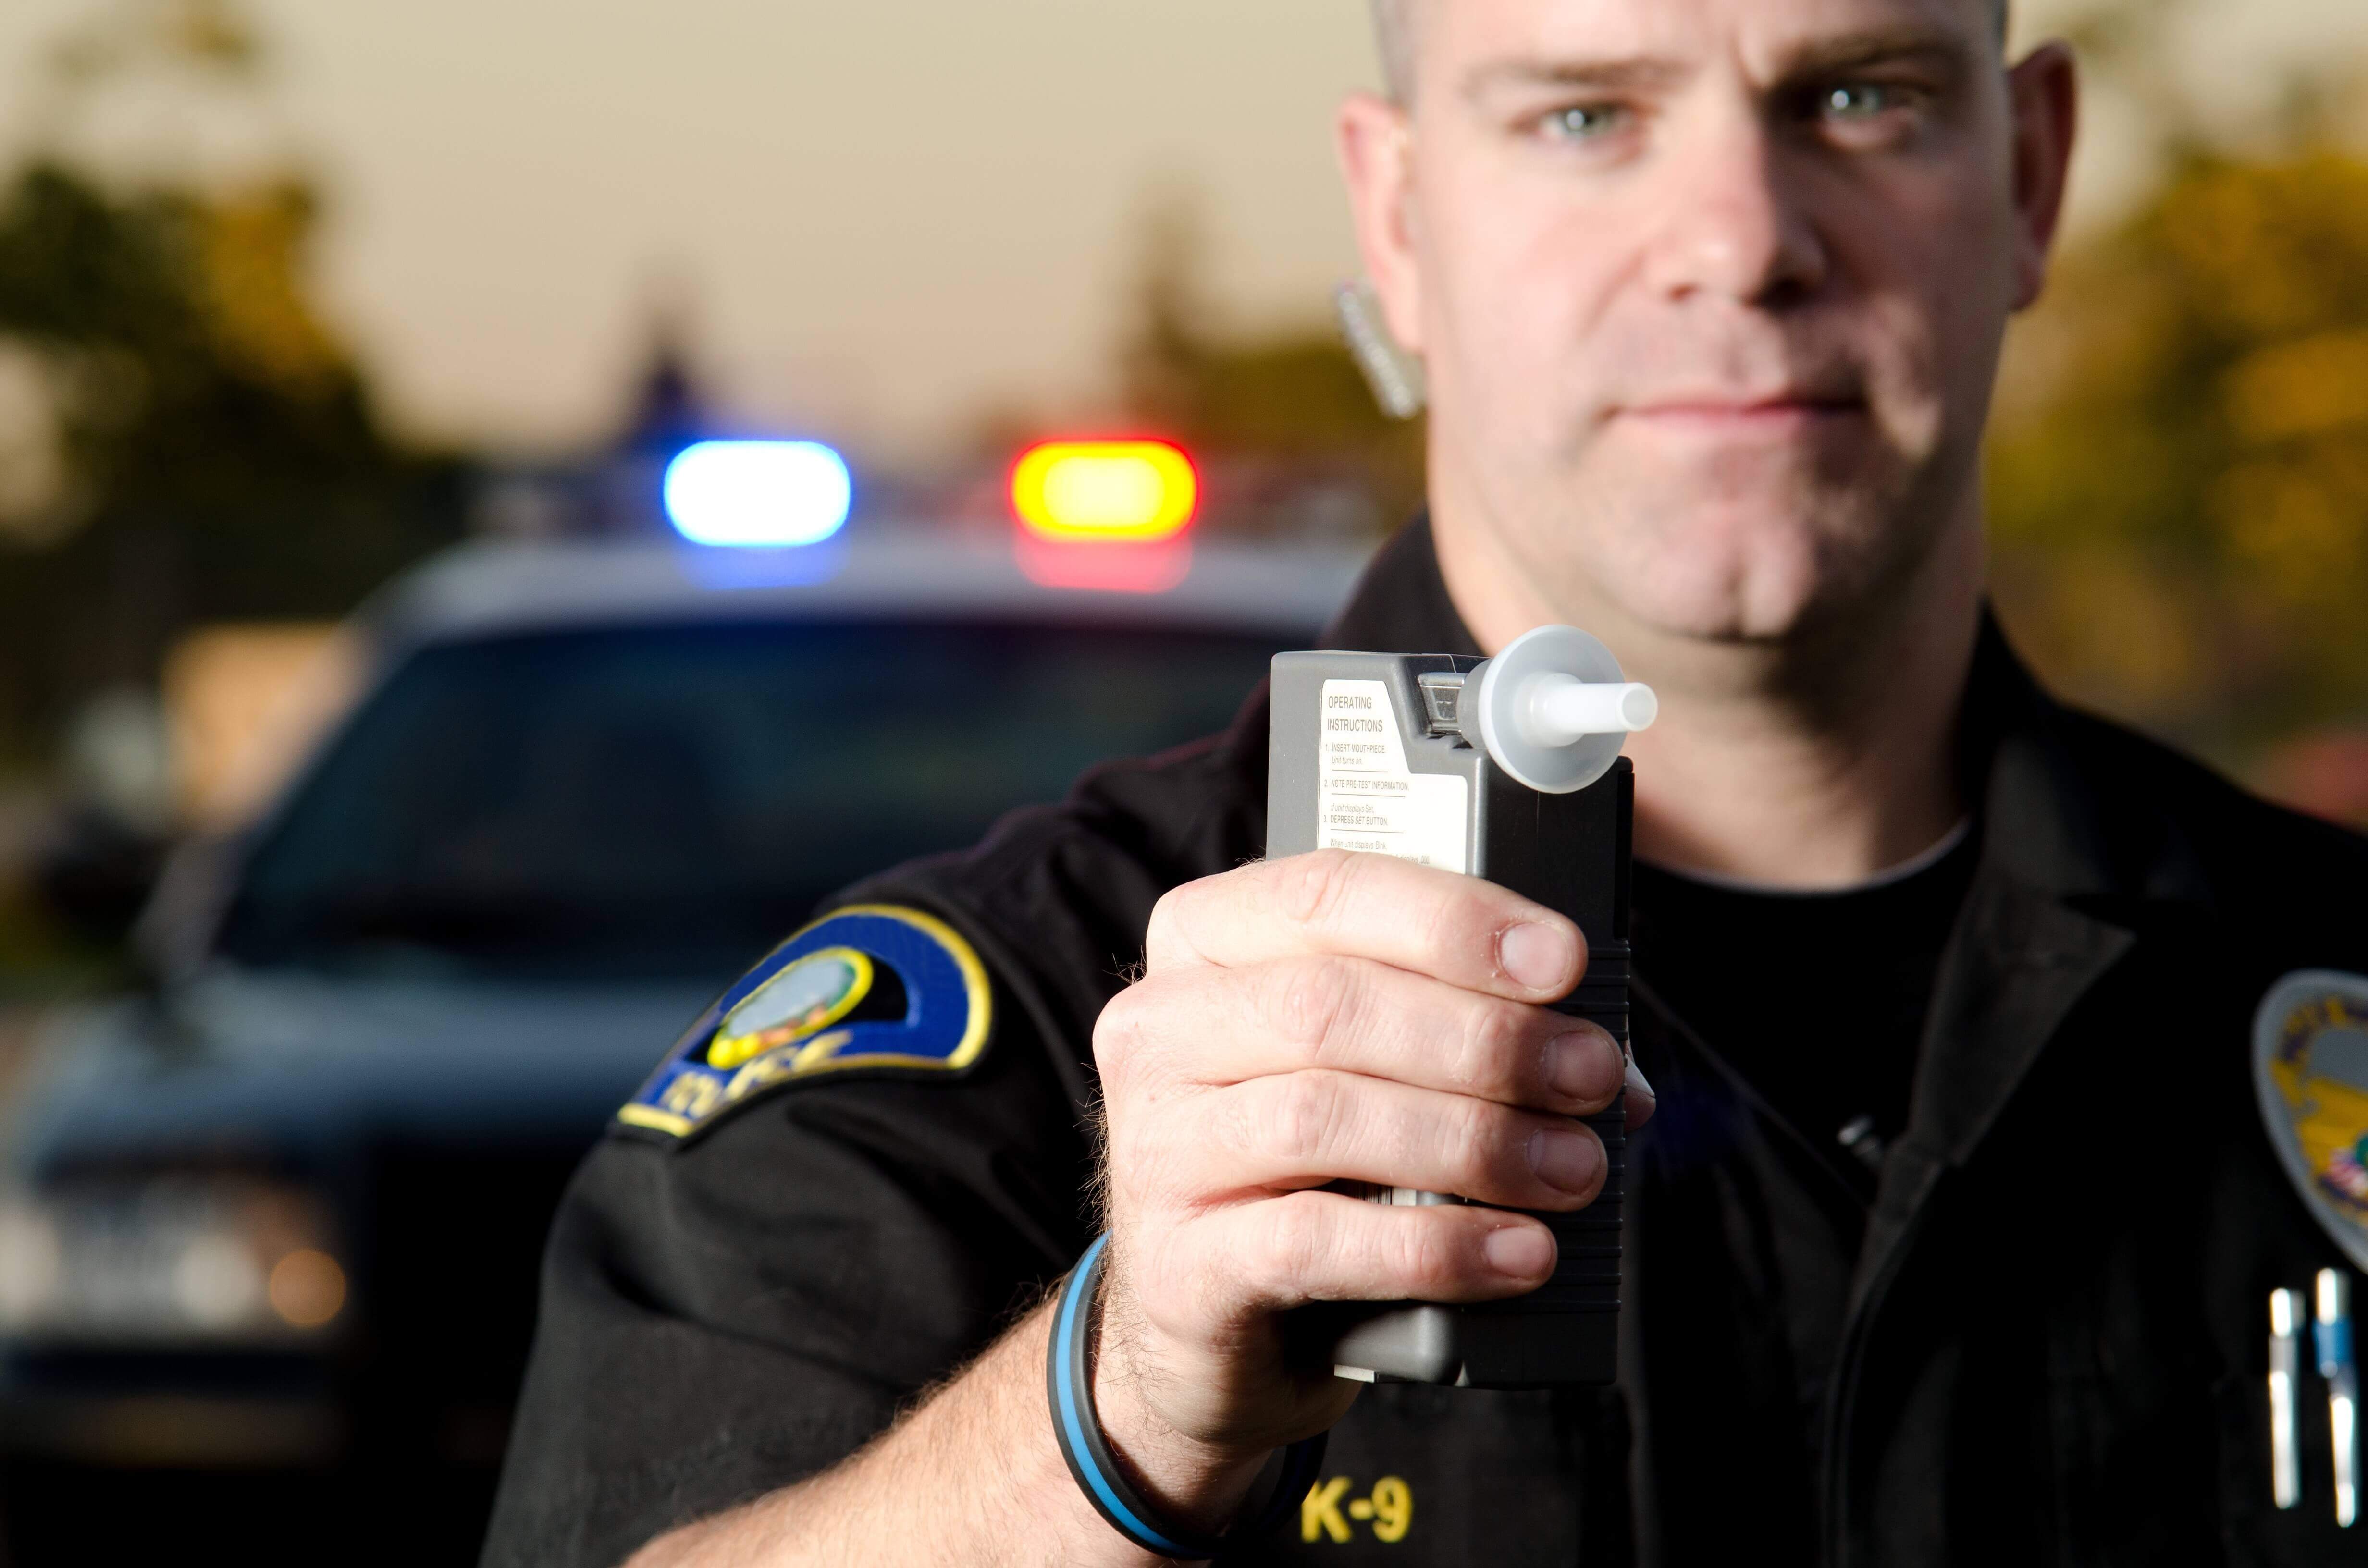 Target 25 DUI: Police officer holding breathalyzer outside vehicle